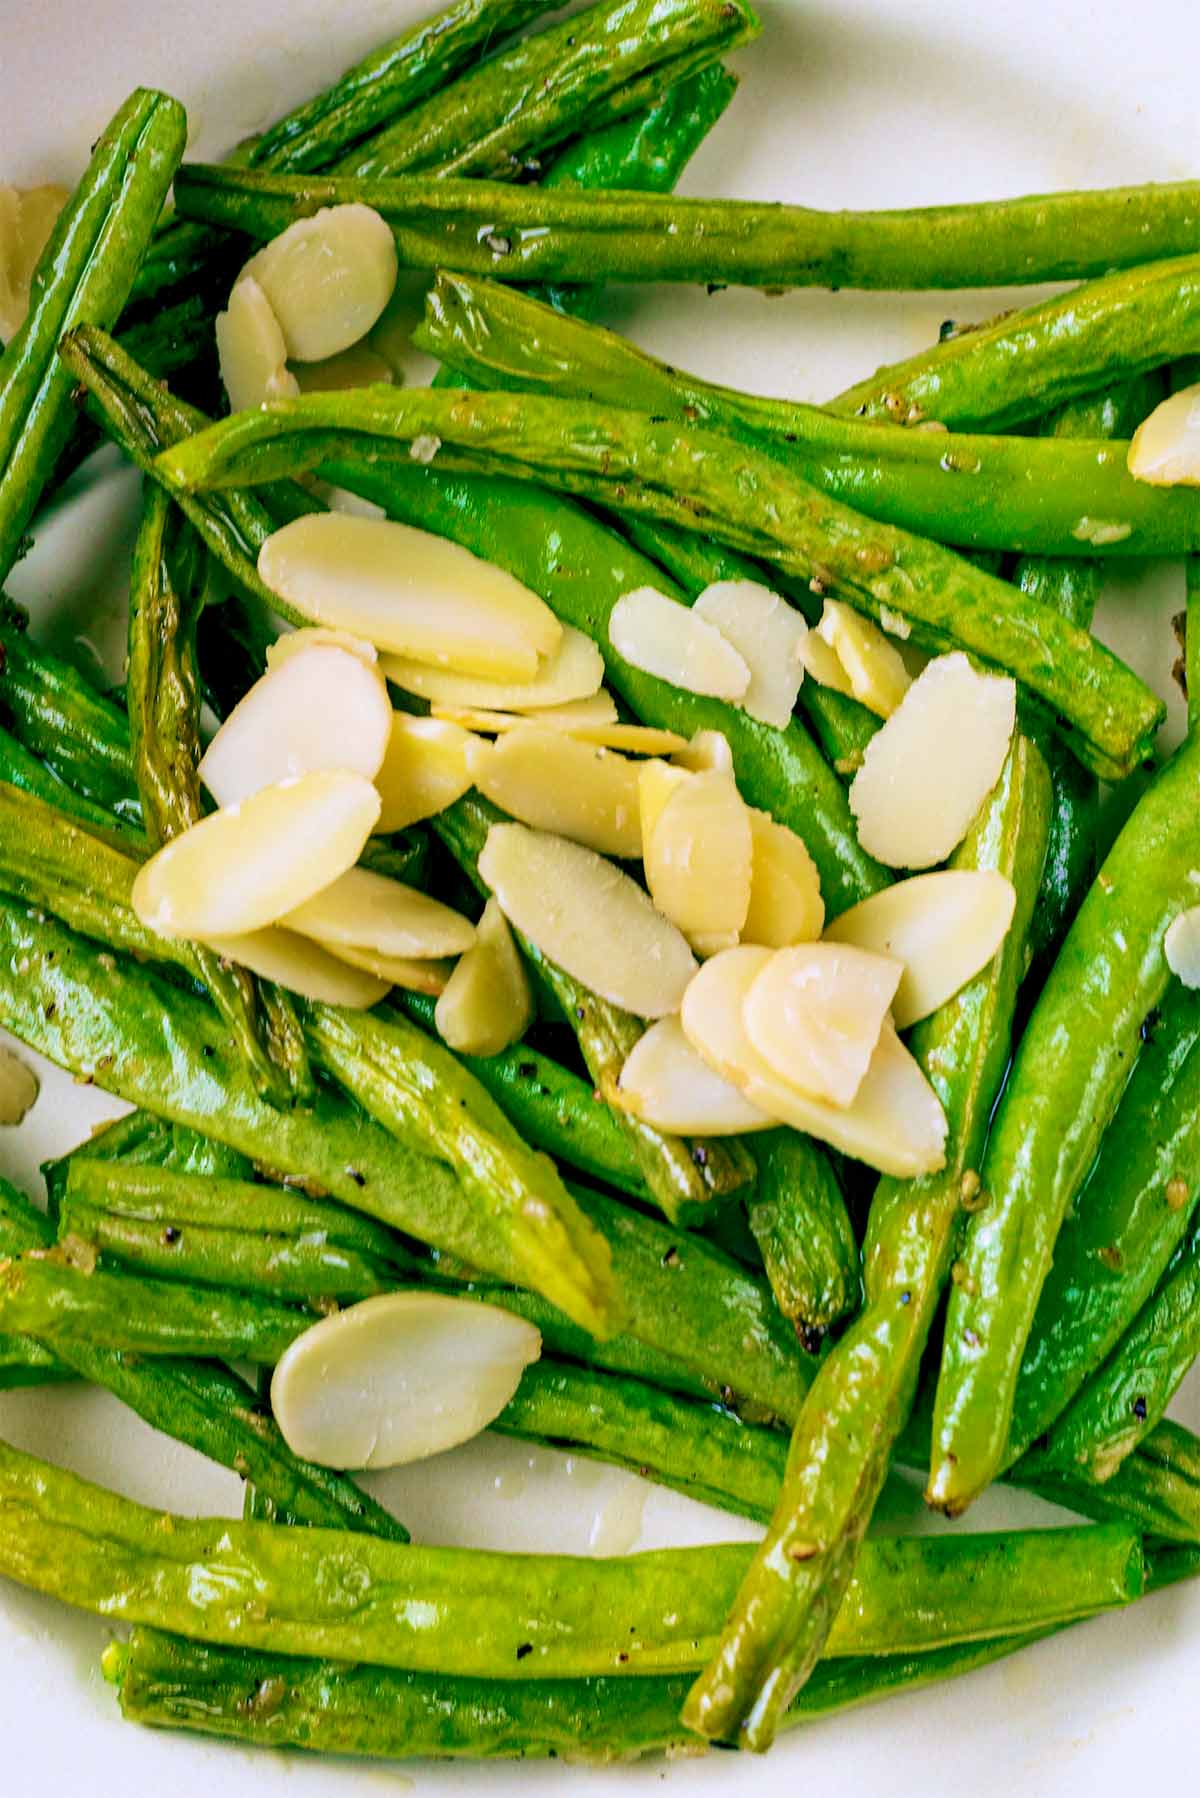 Green beans and almonds on a plate.